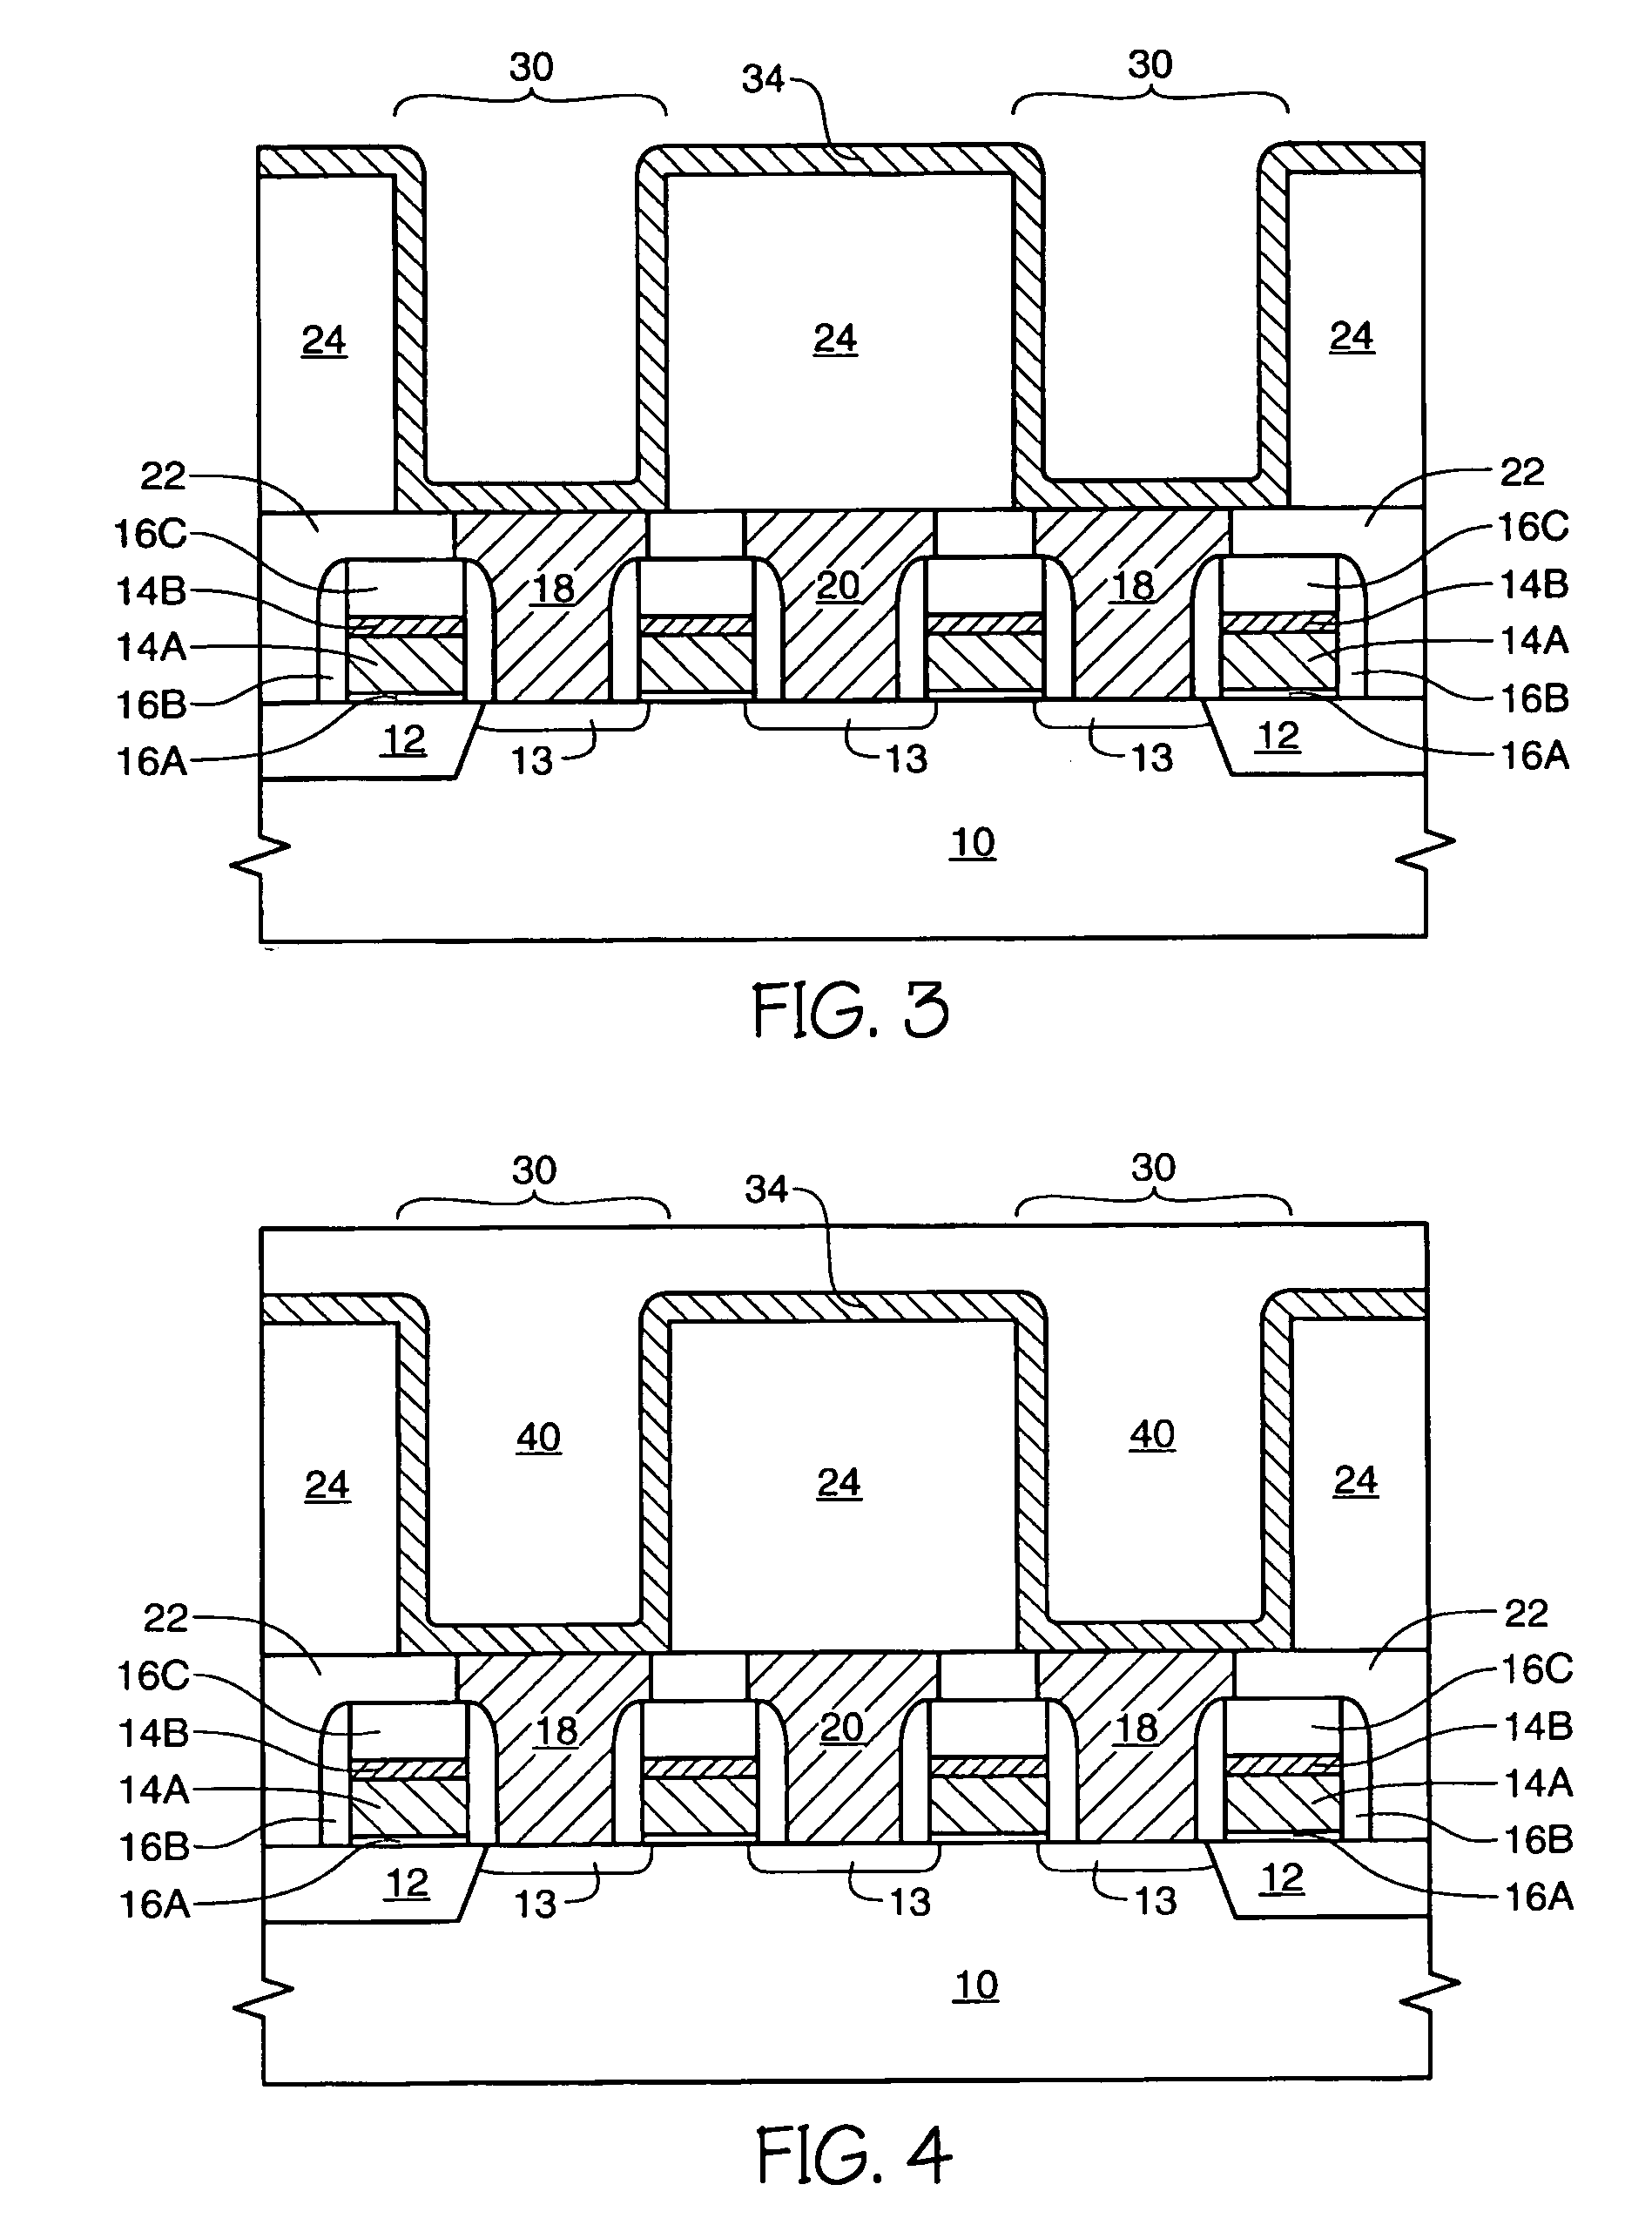 Process for forming a low carbon, low resistance metal film during the manufacture of a semiconductor device and systems including same